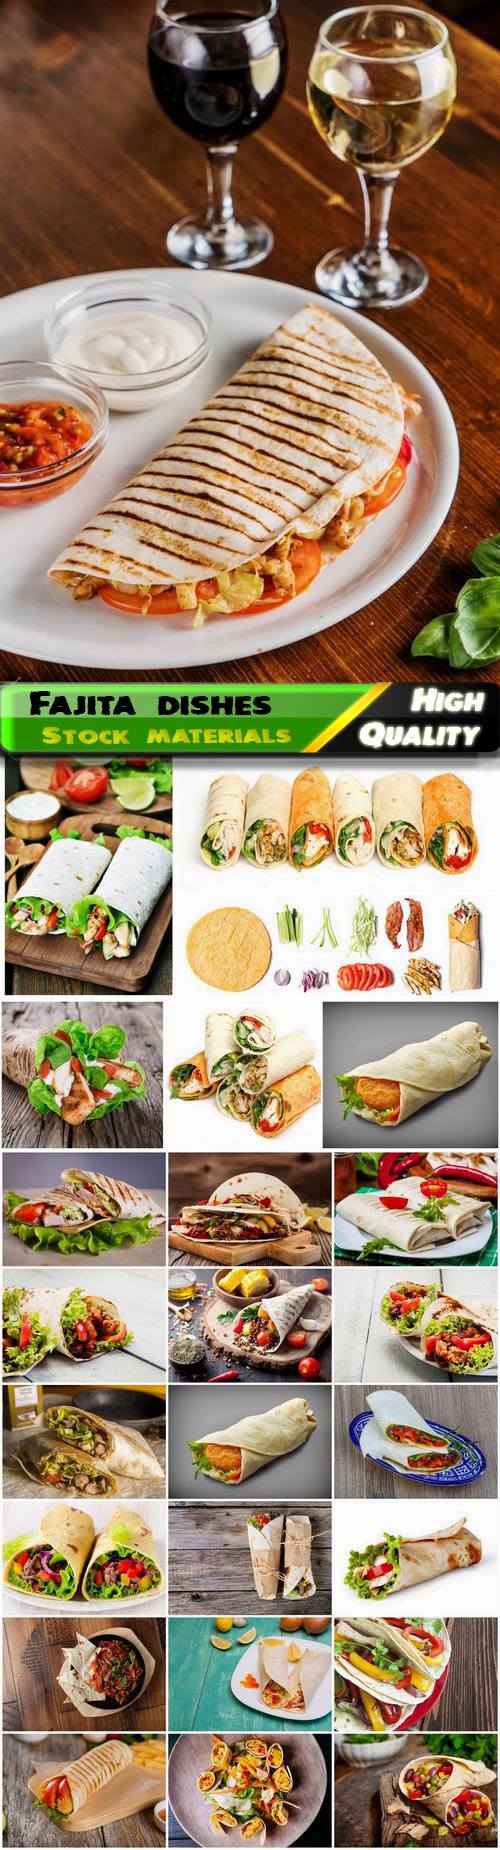 Fajita dishes is a fusion of United States cuisine and Mexican cuisines